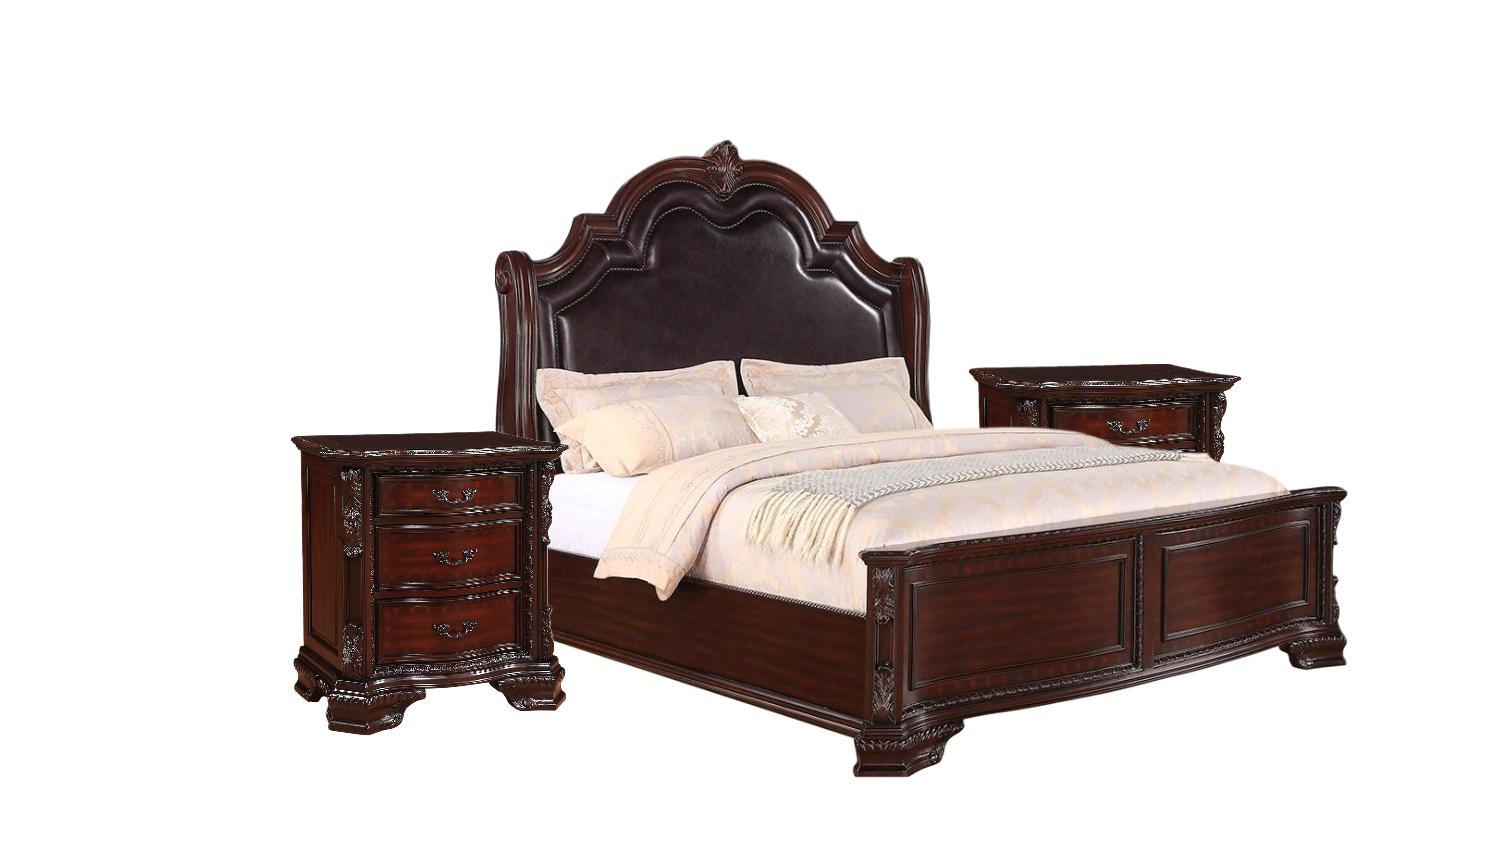 Classic, Vintage Panel Bedroom Set Sheffield B1100-Q-Bed-3pcs in Brown PU